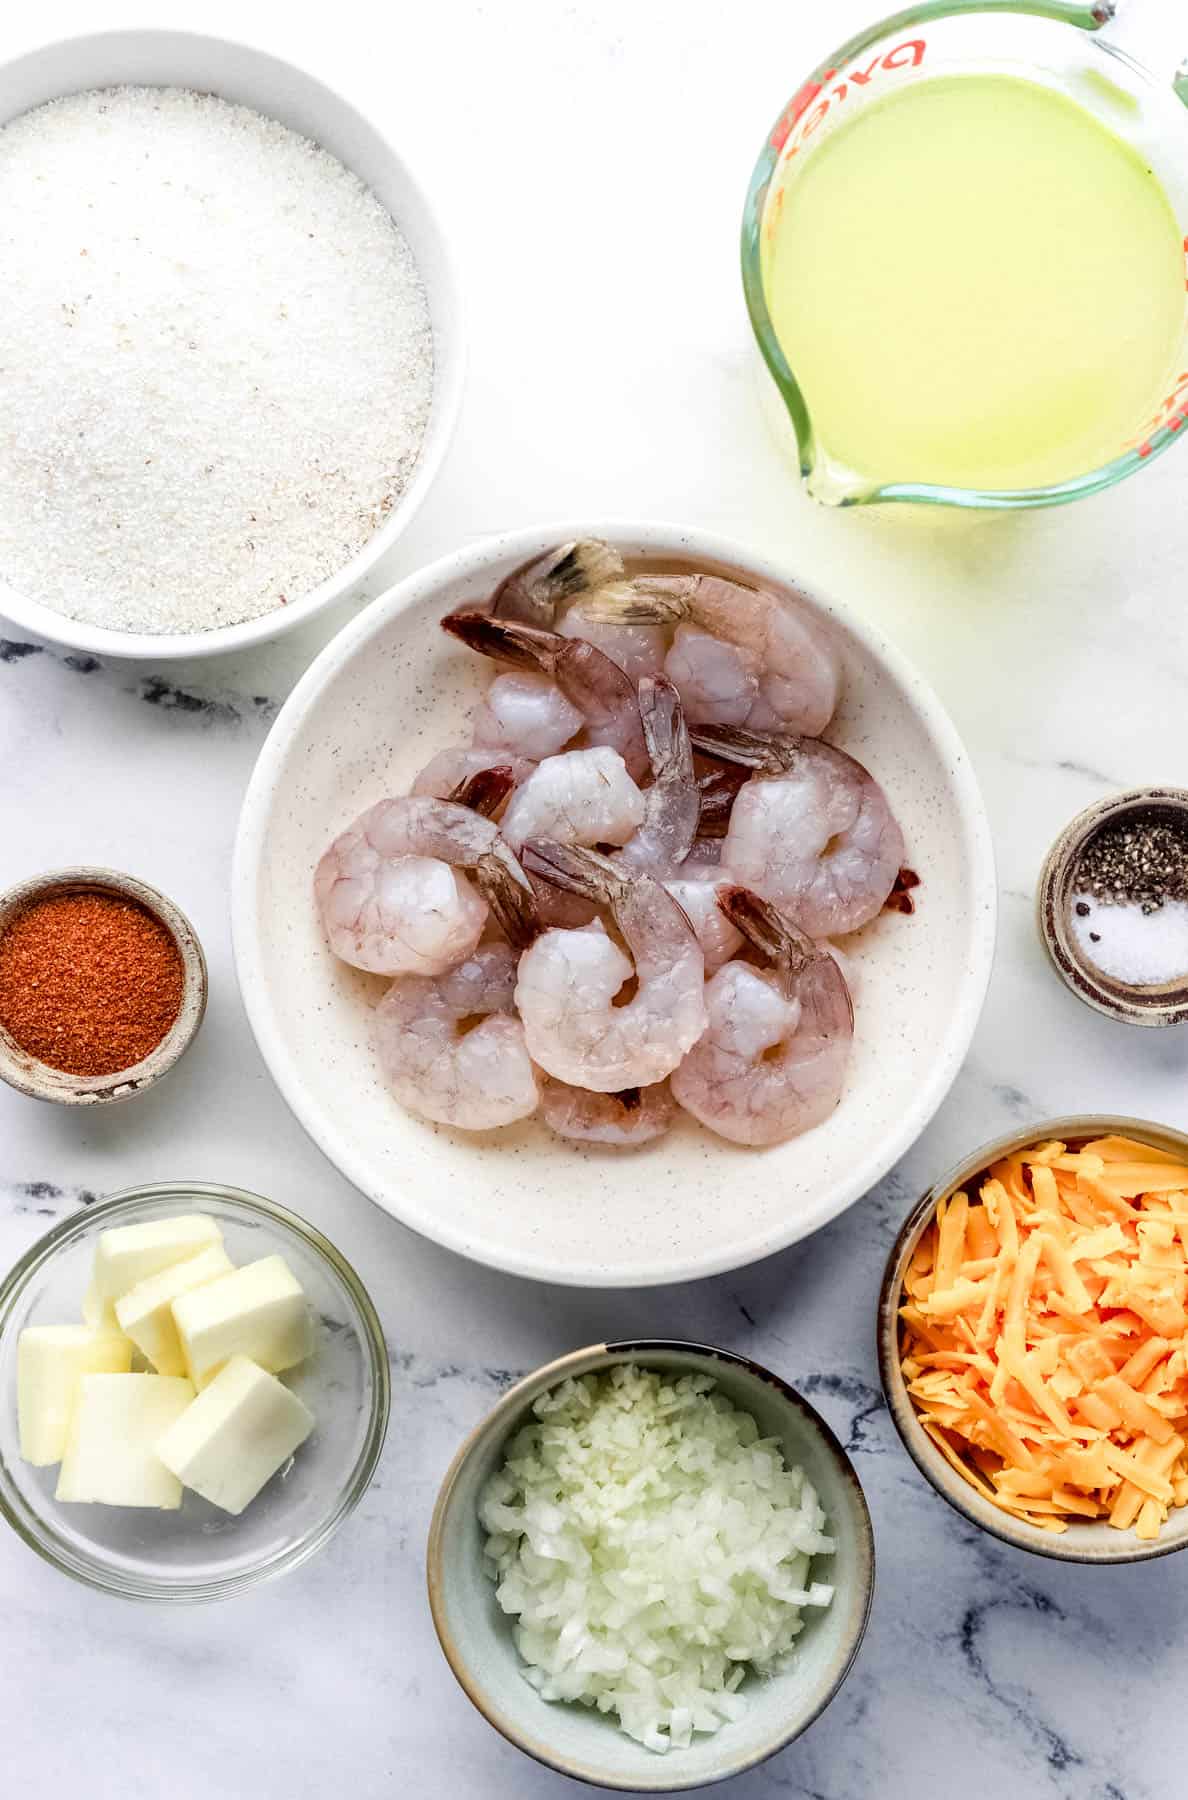 Overhead view of ingredients needed to make shrimp and grits in separate bowls on marble surface. 